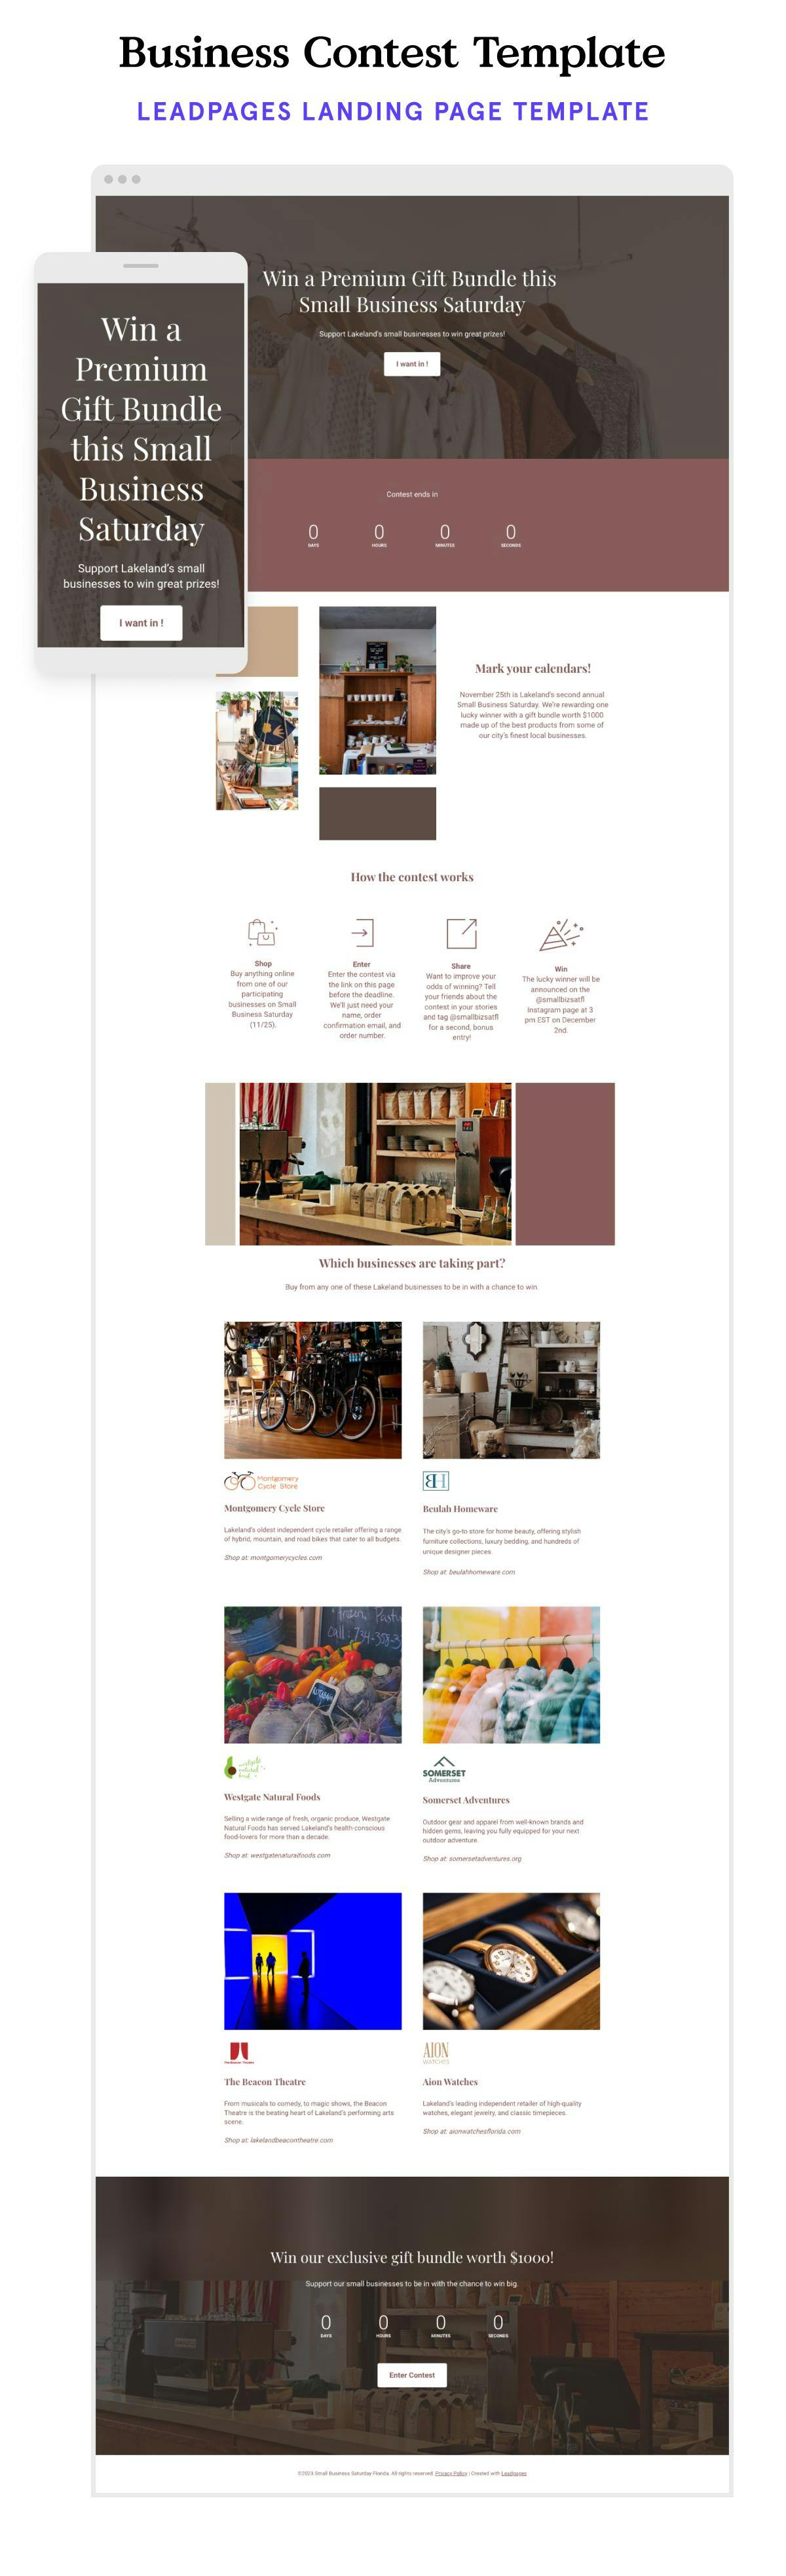 Small business giveaway landing page template